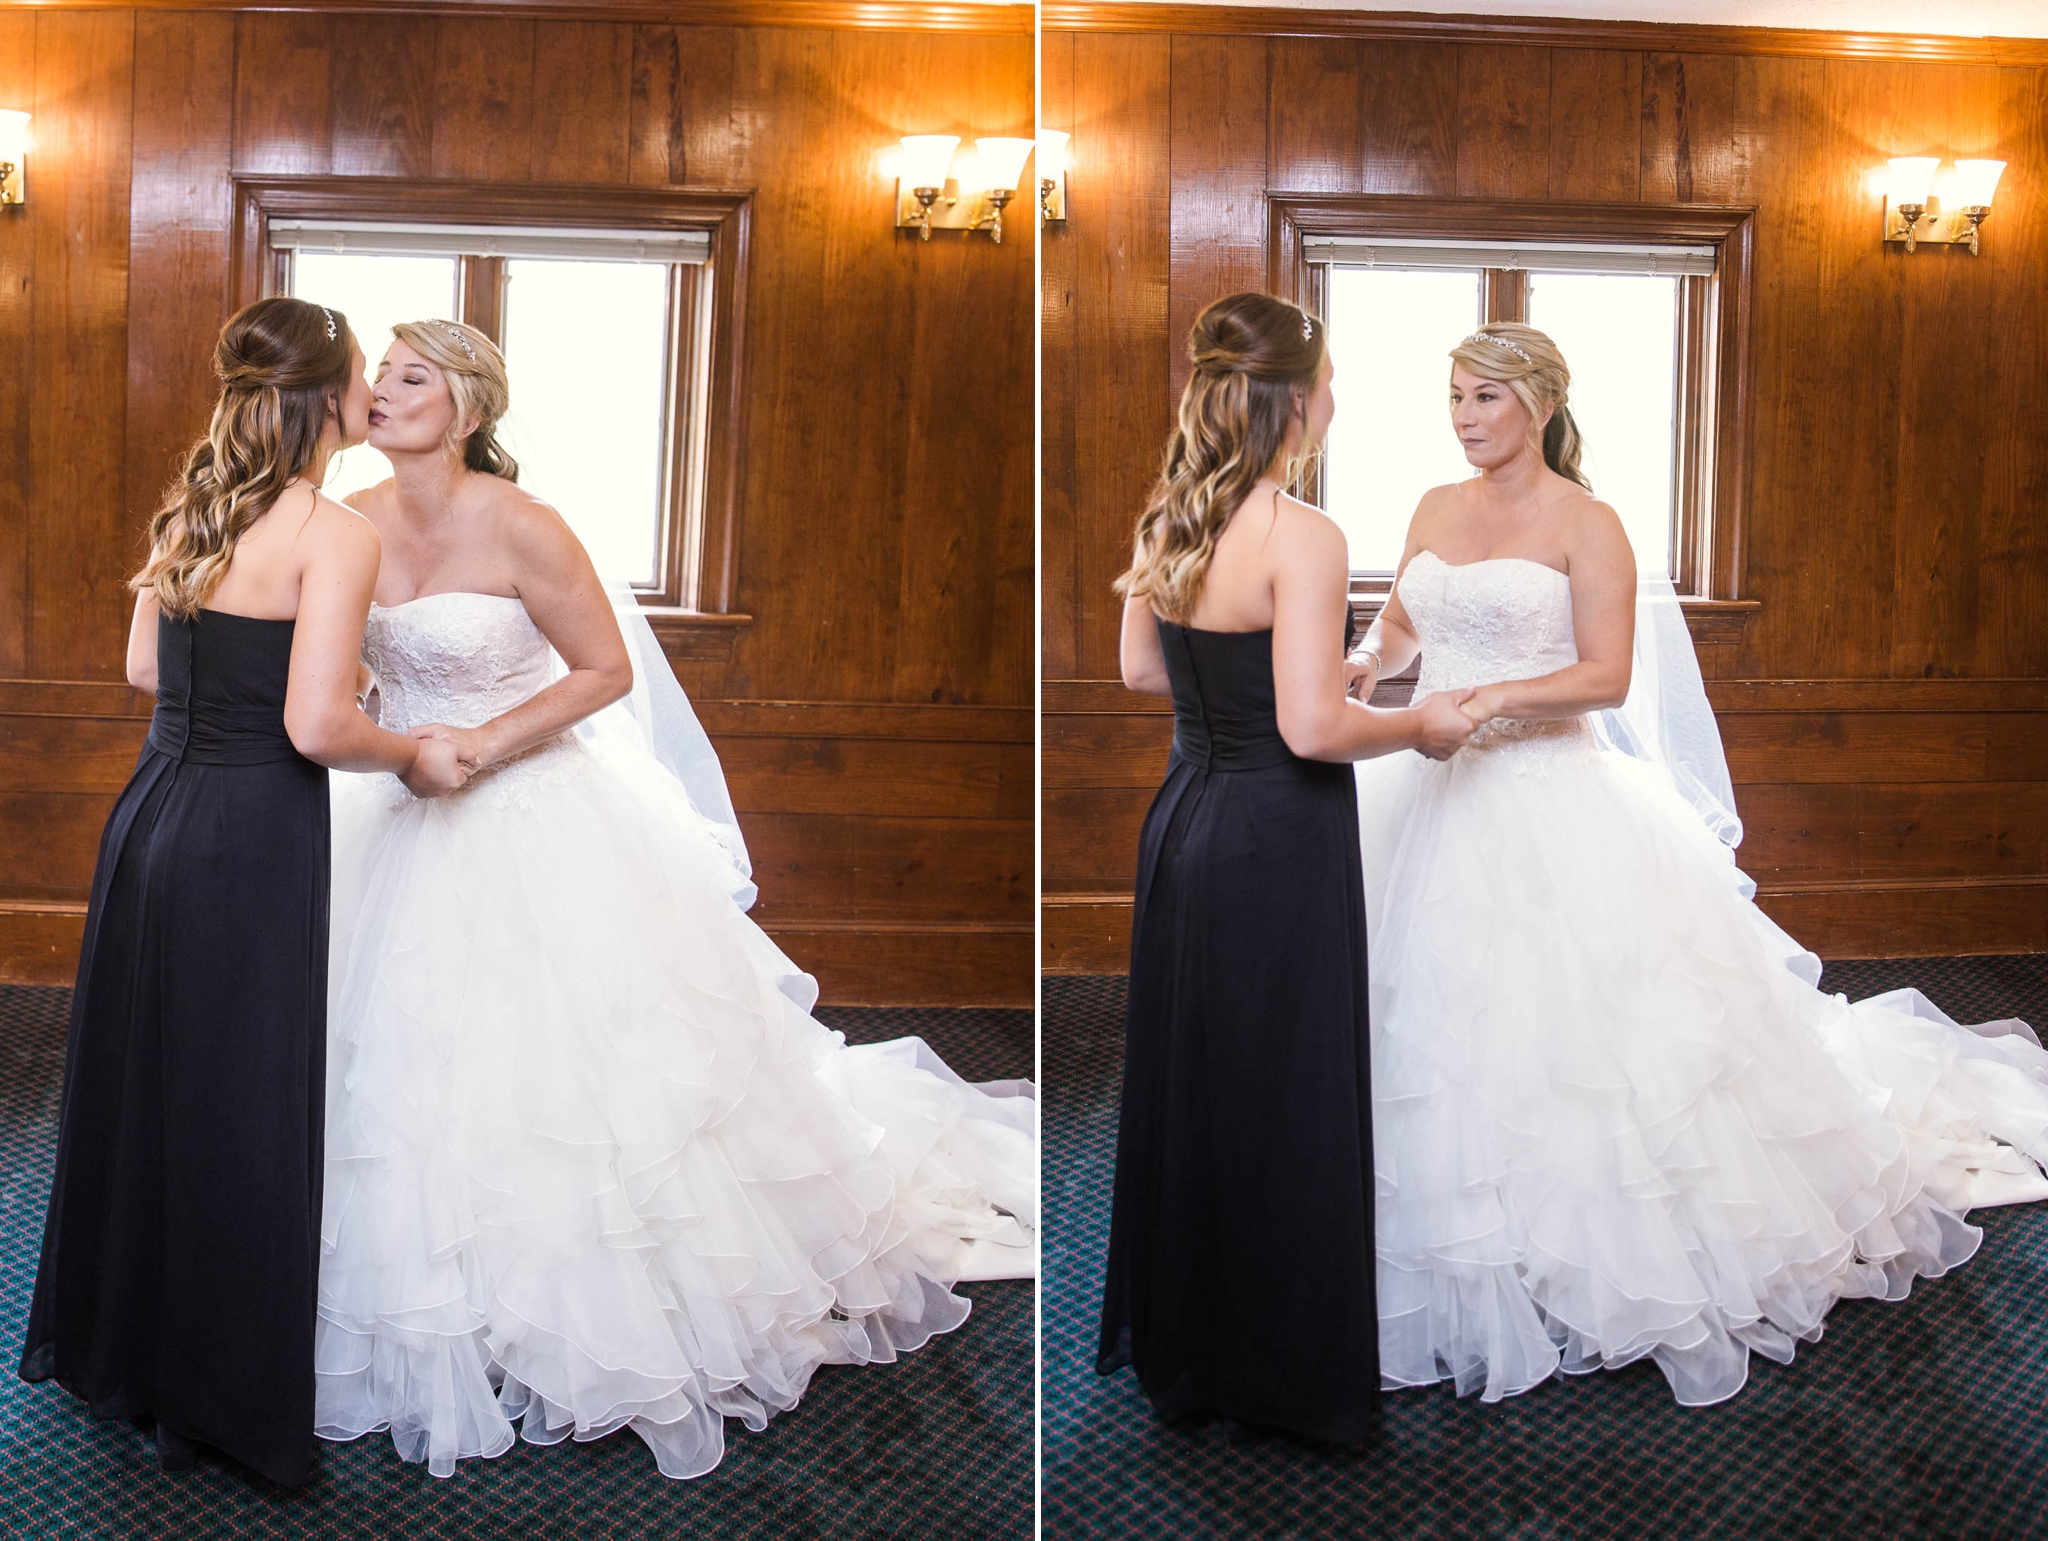 Bride with her daughter before the wedding - Dona + Doug - MacGregor Downs Country Club in Cary, NC - Raleigh Wedding Photographer